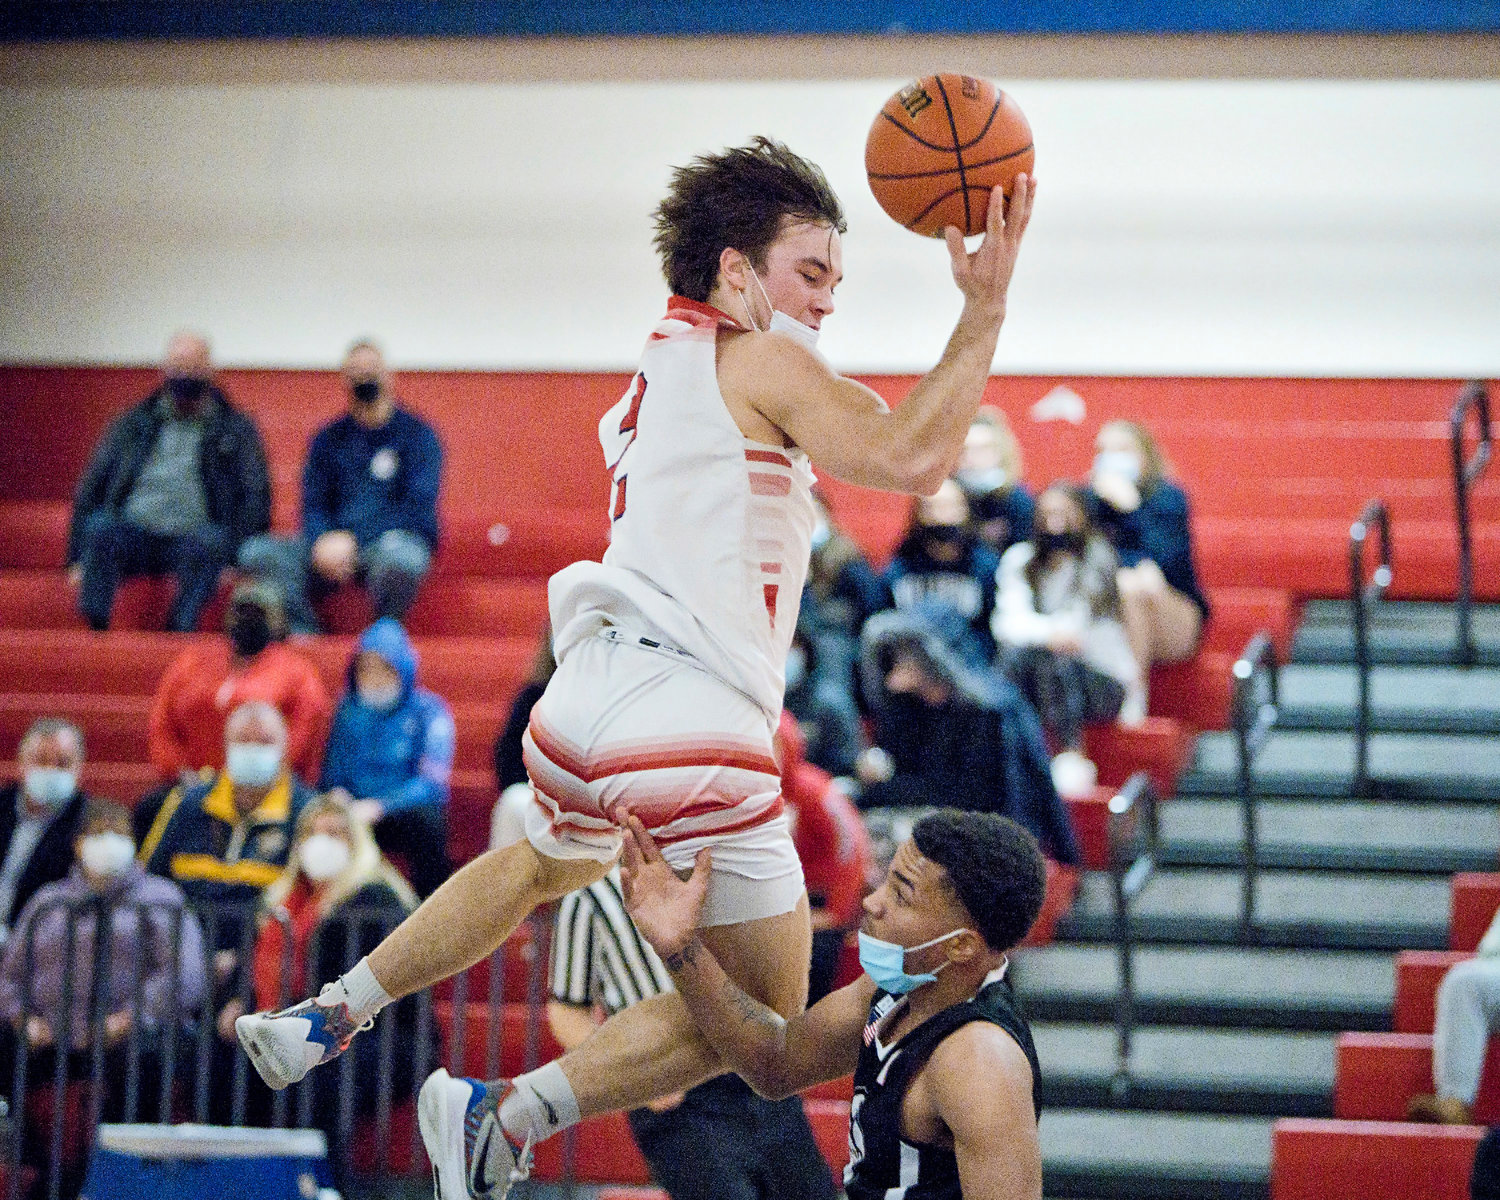 Portsmouth High’s Benny Hurd soares over a Mount Pleasant opponent during the Patriots’ home game Friday night. Hurd was the high-scorer for the Patriots with 20 points, but Portsmouth lost, 57-51.